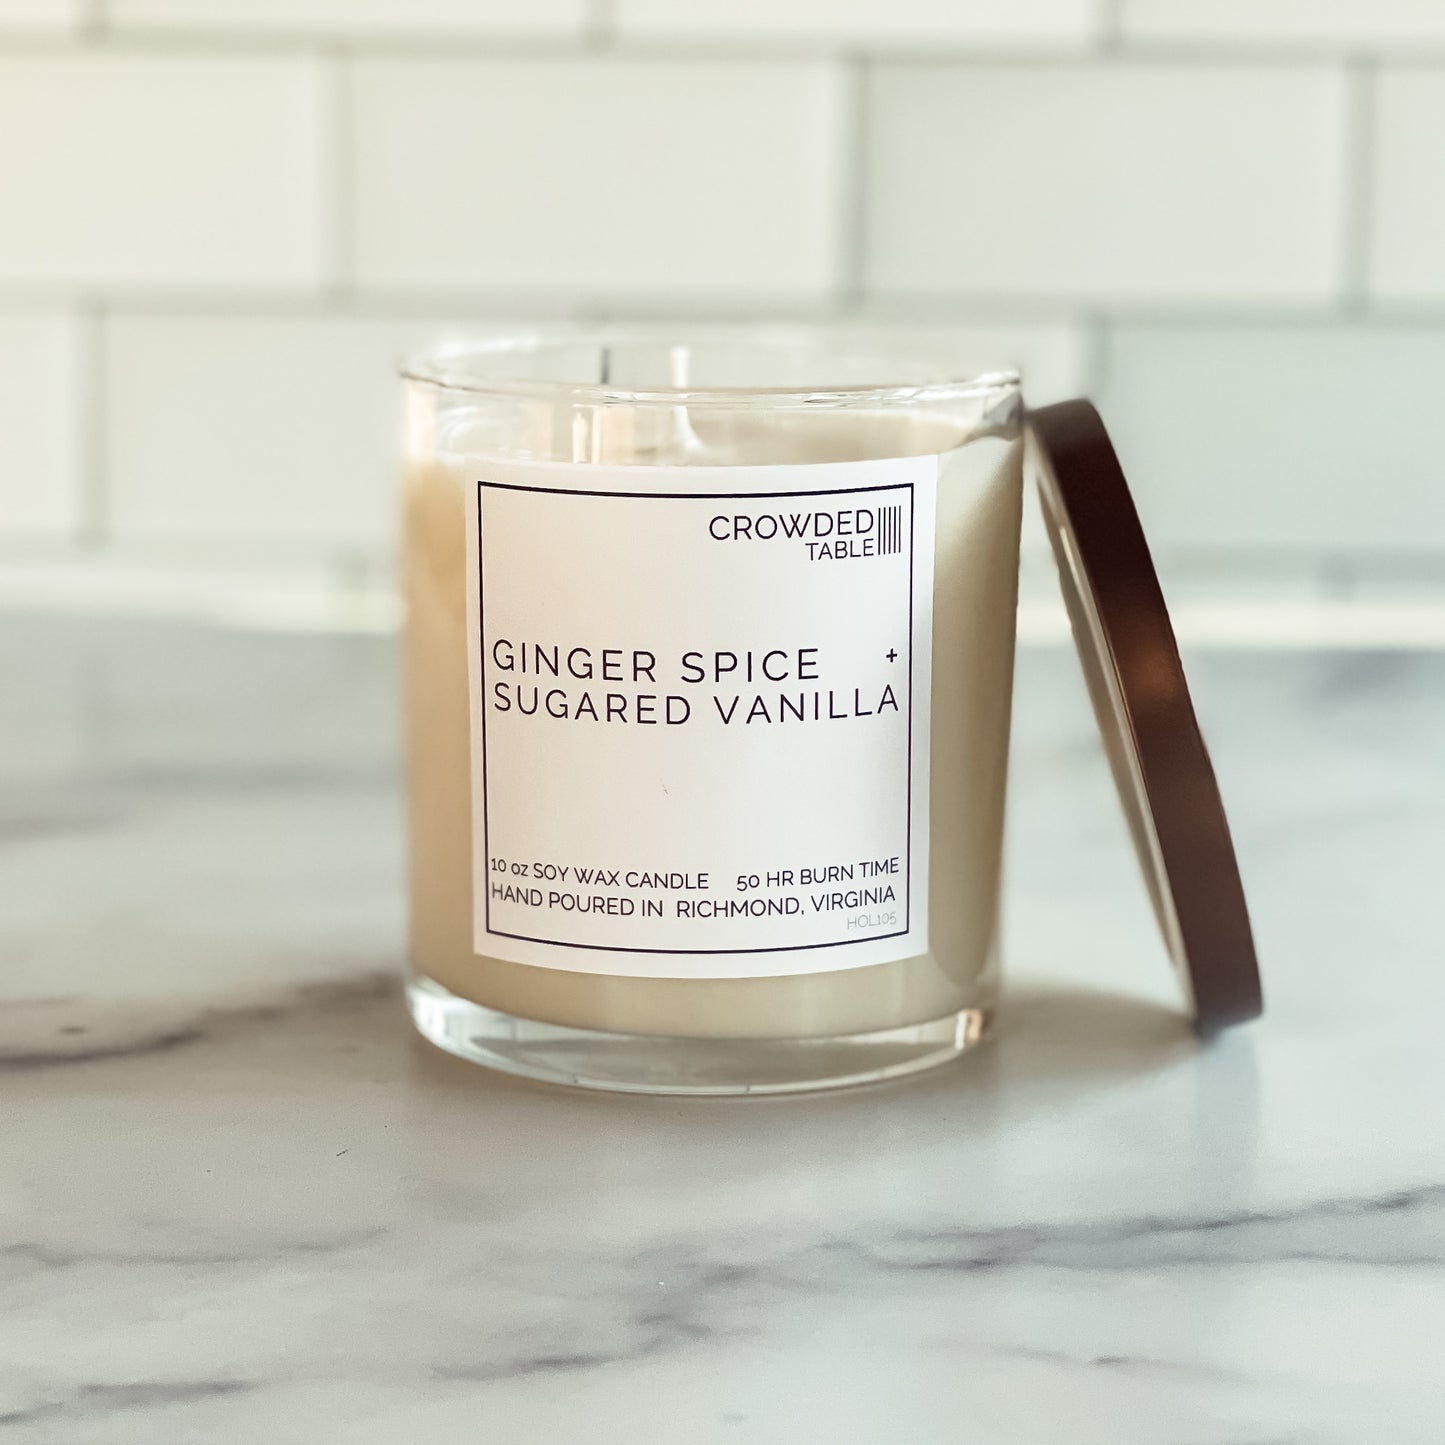 Ginger Spice + Sugared Vanilla 10 oz. Pure Soy Wax Candle